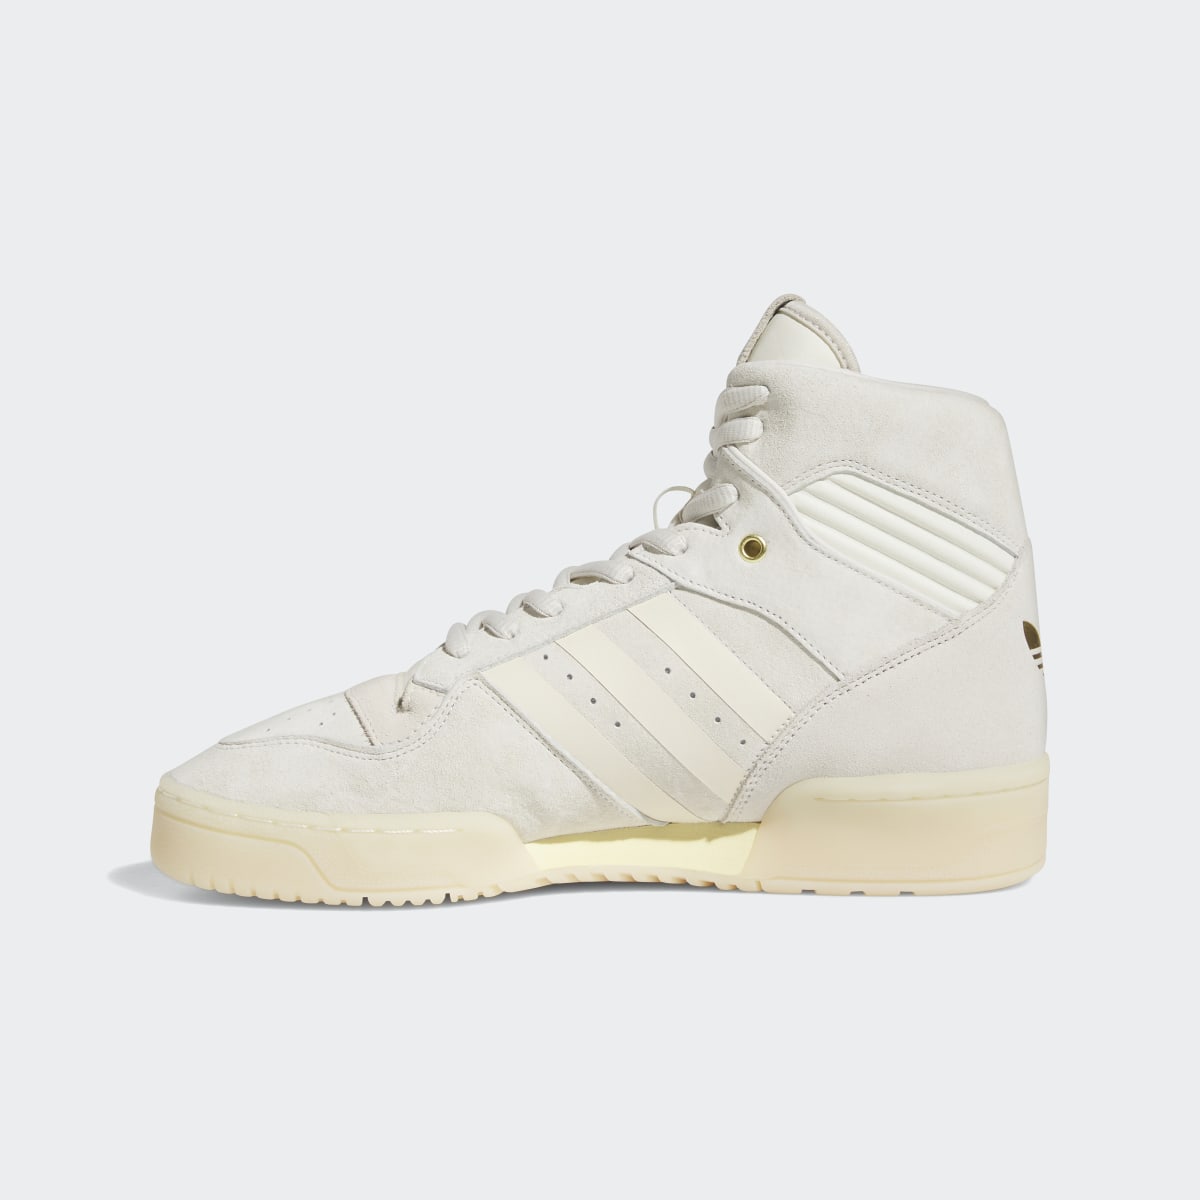 Adidas Rivalry High Shoes. 7